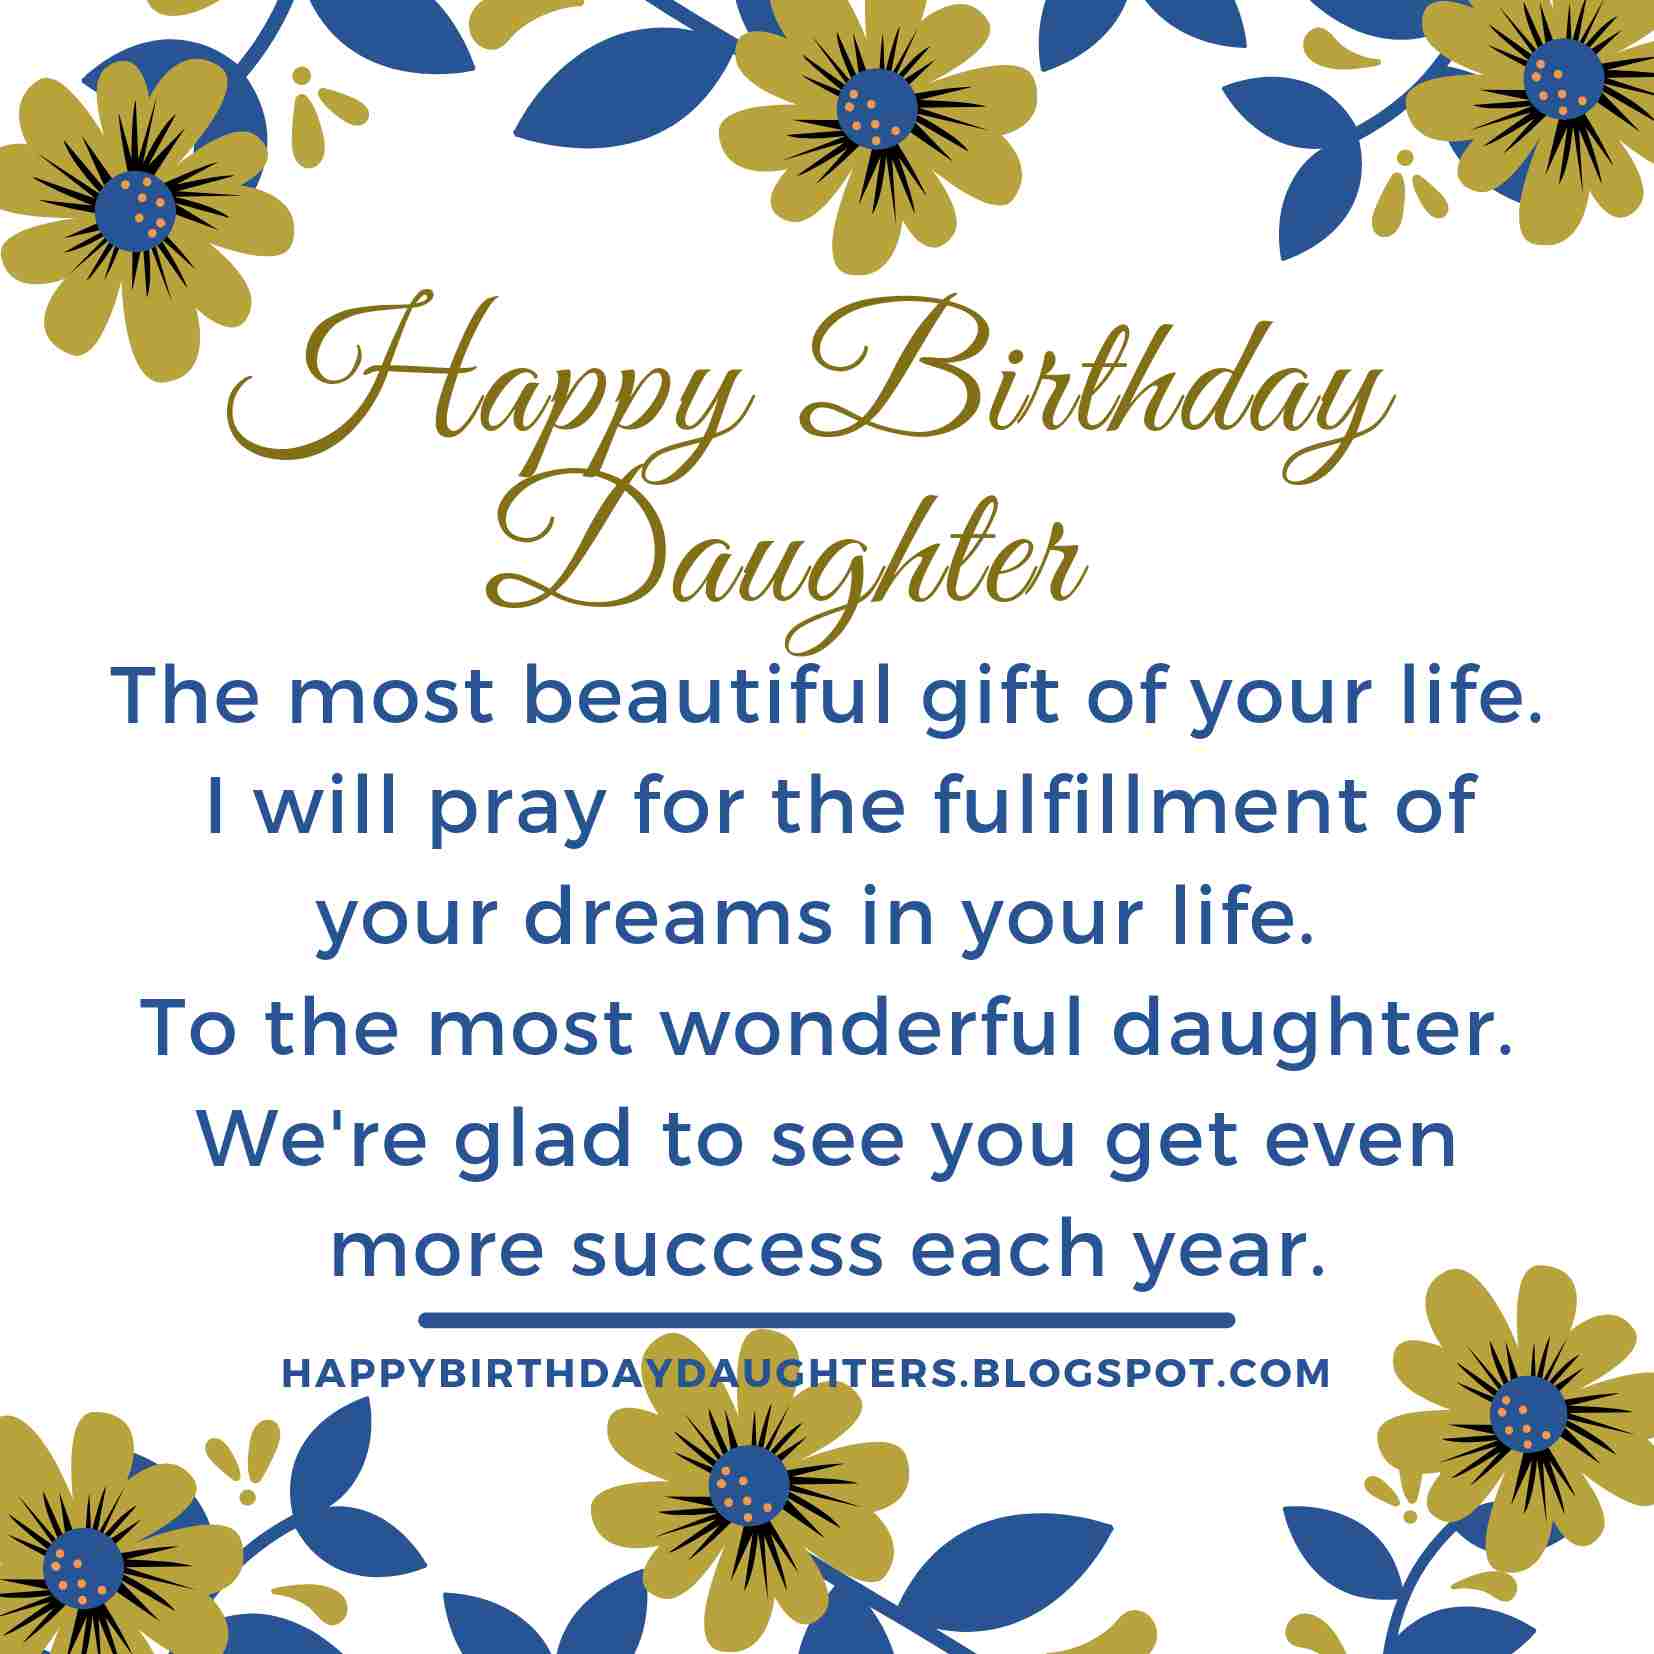 Happy birthday daughter wishes images